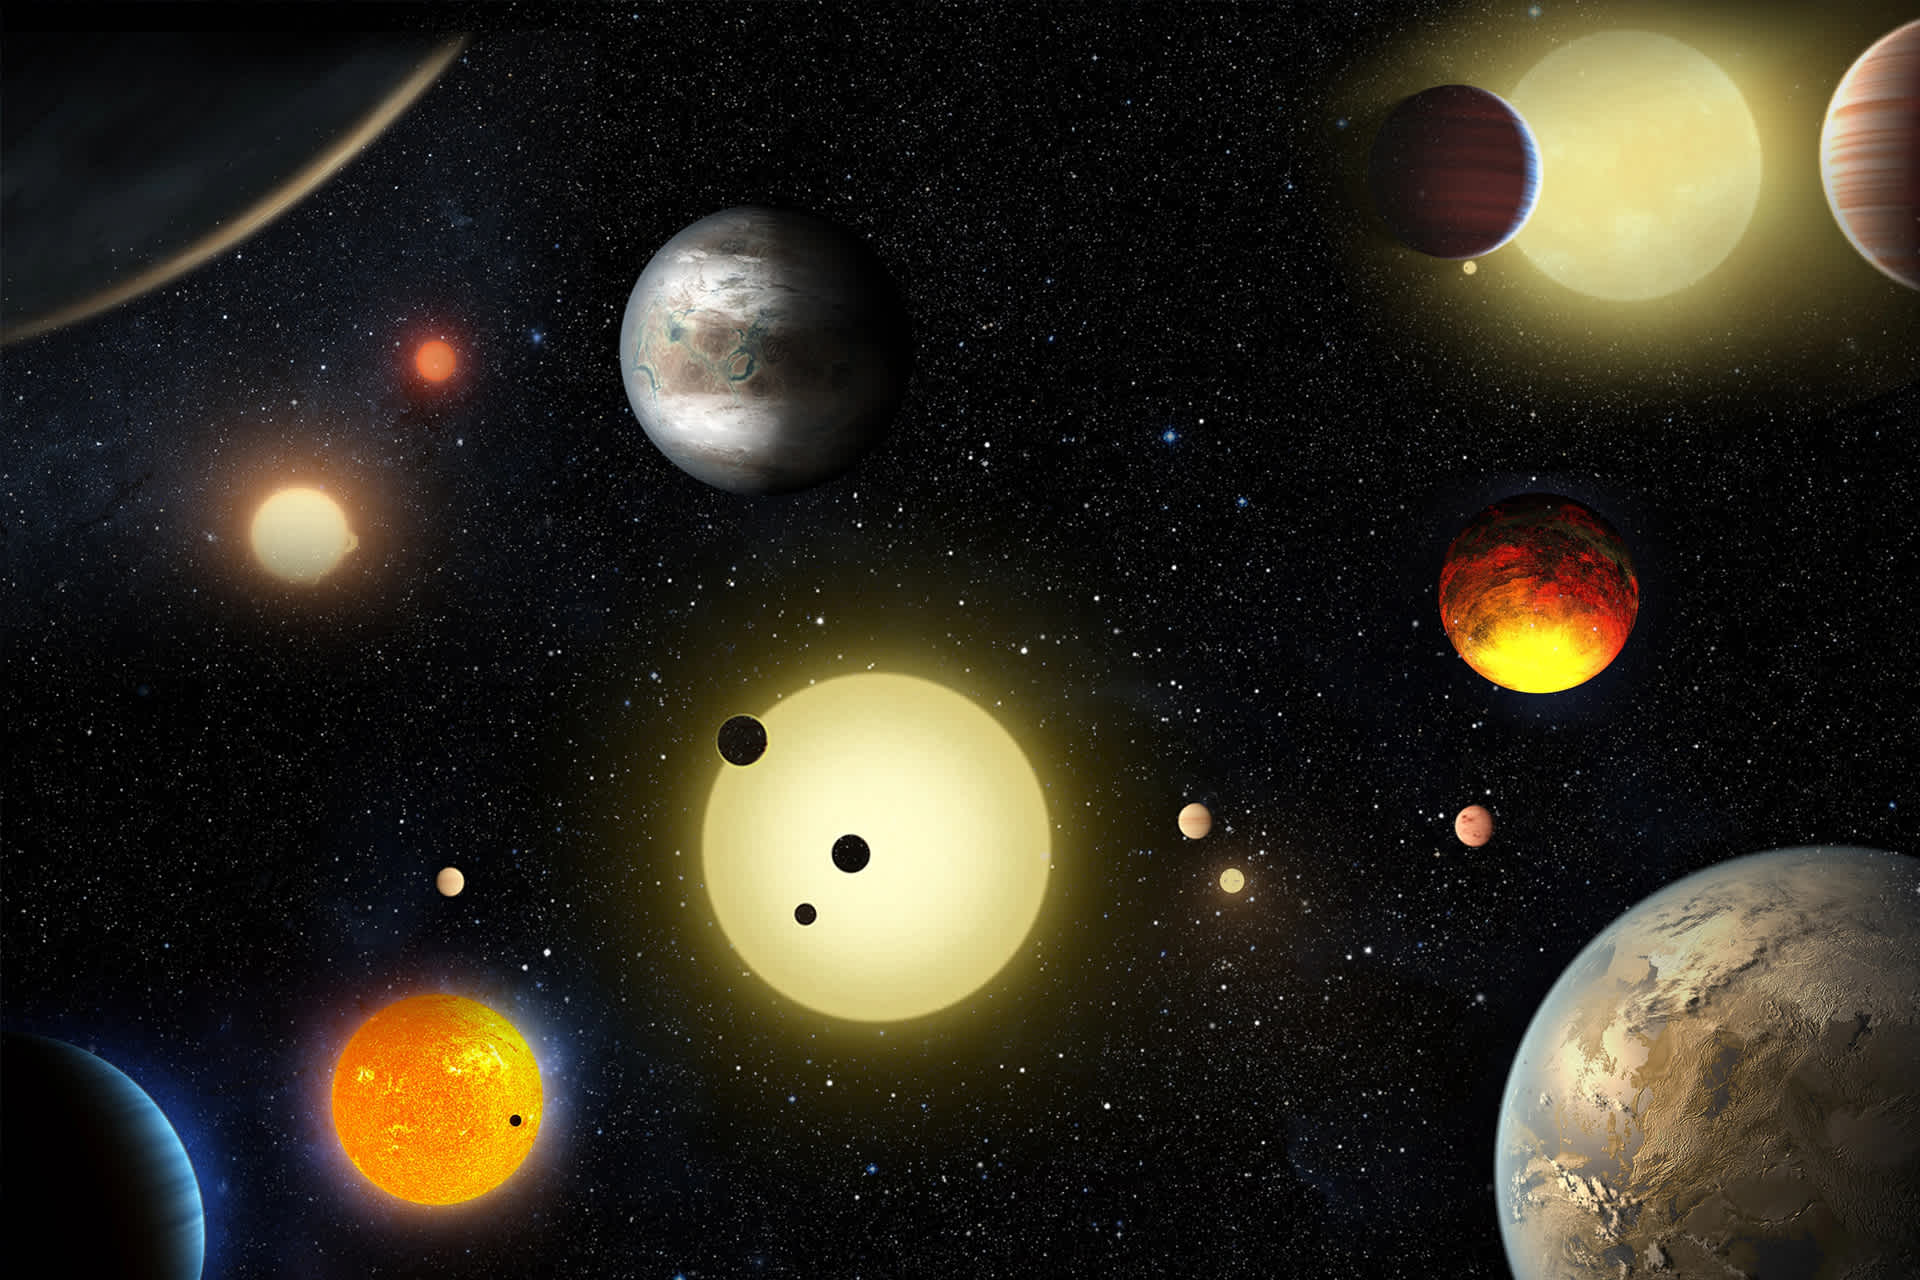 A drawing representing new exoplanets found by the Kepler space telescope.